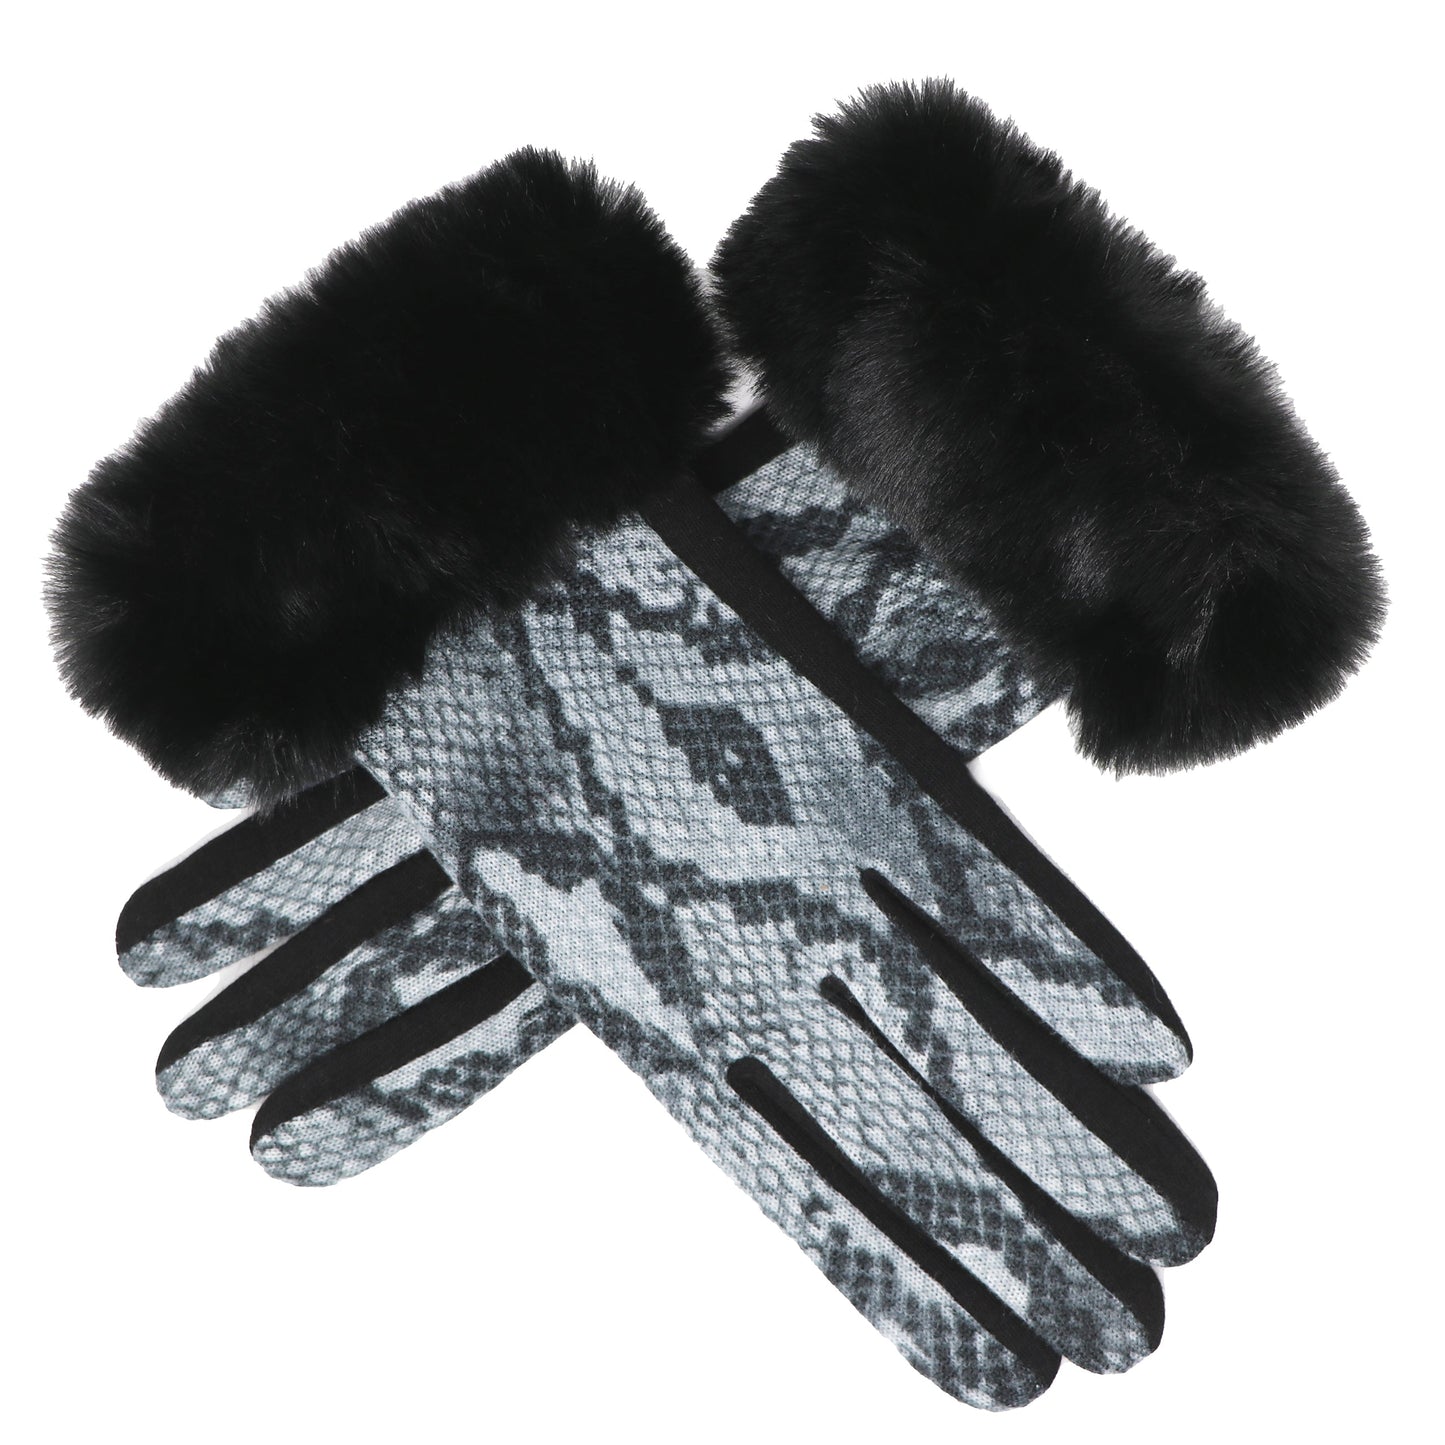 Luxury Faux-Fur Snakeskin Gloves, Touchscreen compatible, One Size